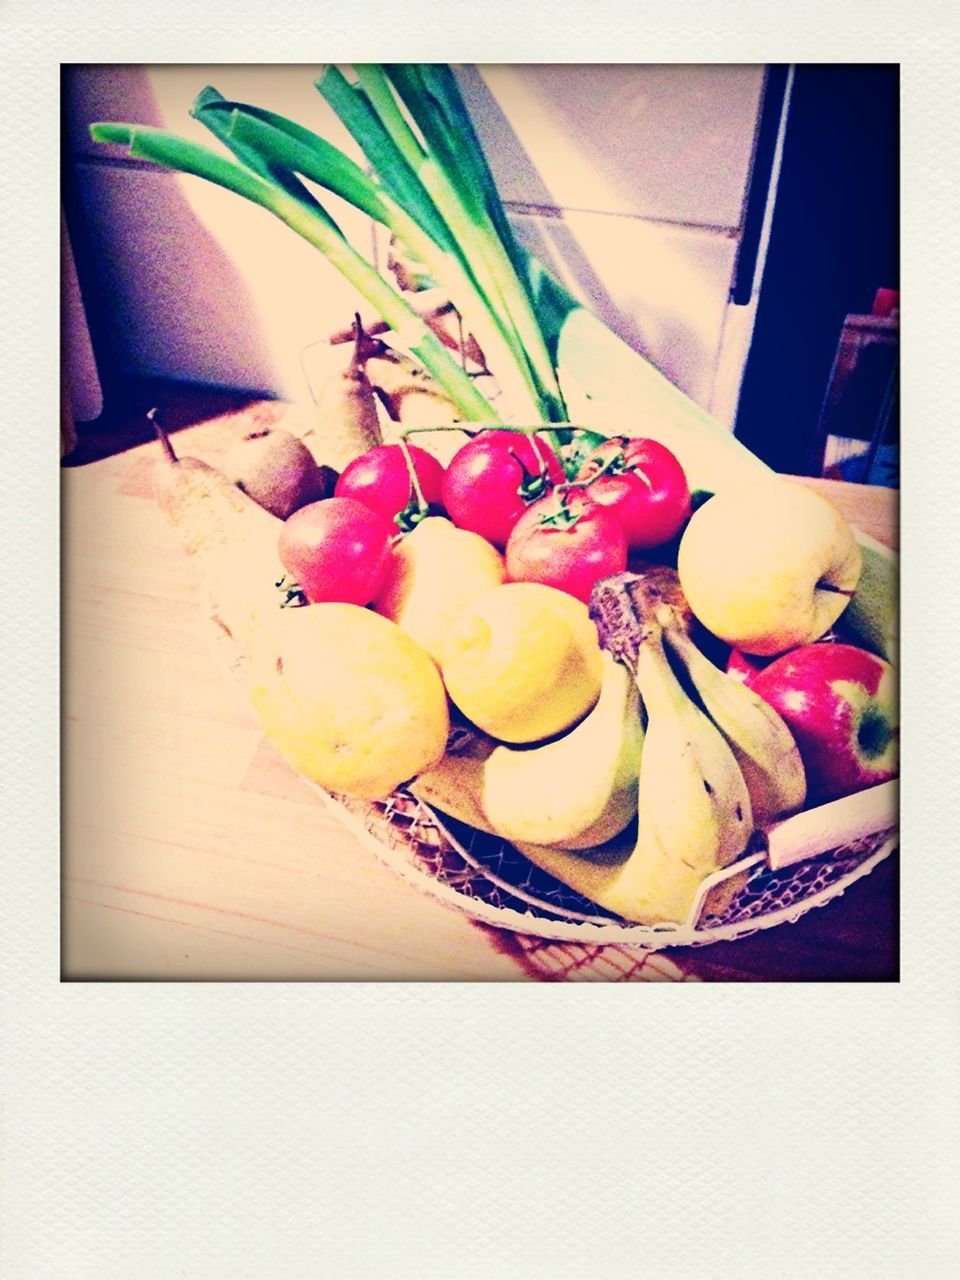 Fresh fruits and vegetables in basket on table